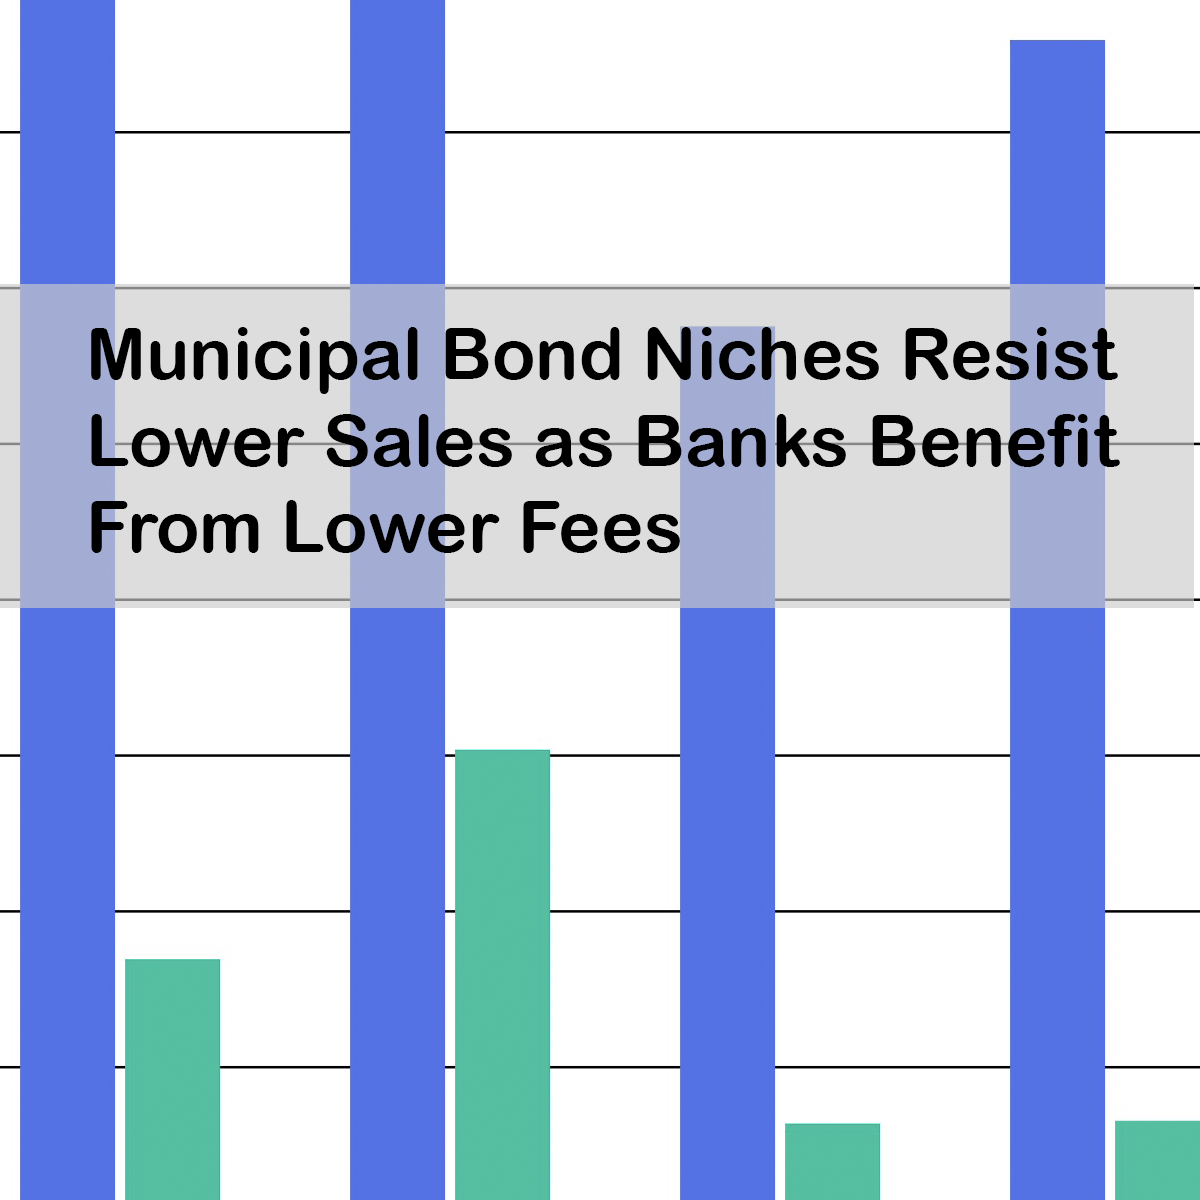 Municipal Bond Niches Resist Lower Sales as Banks Benefit From Lower Fees